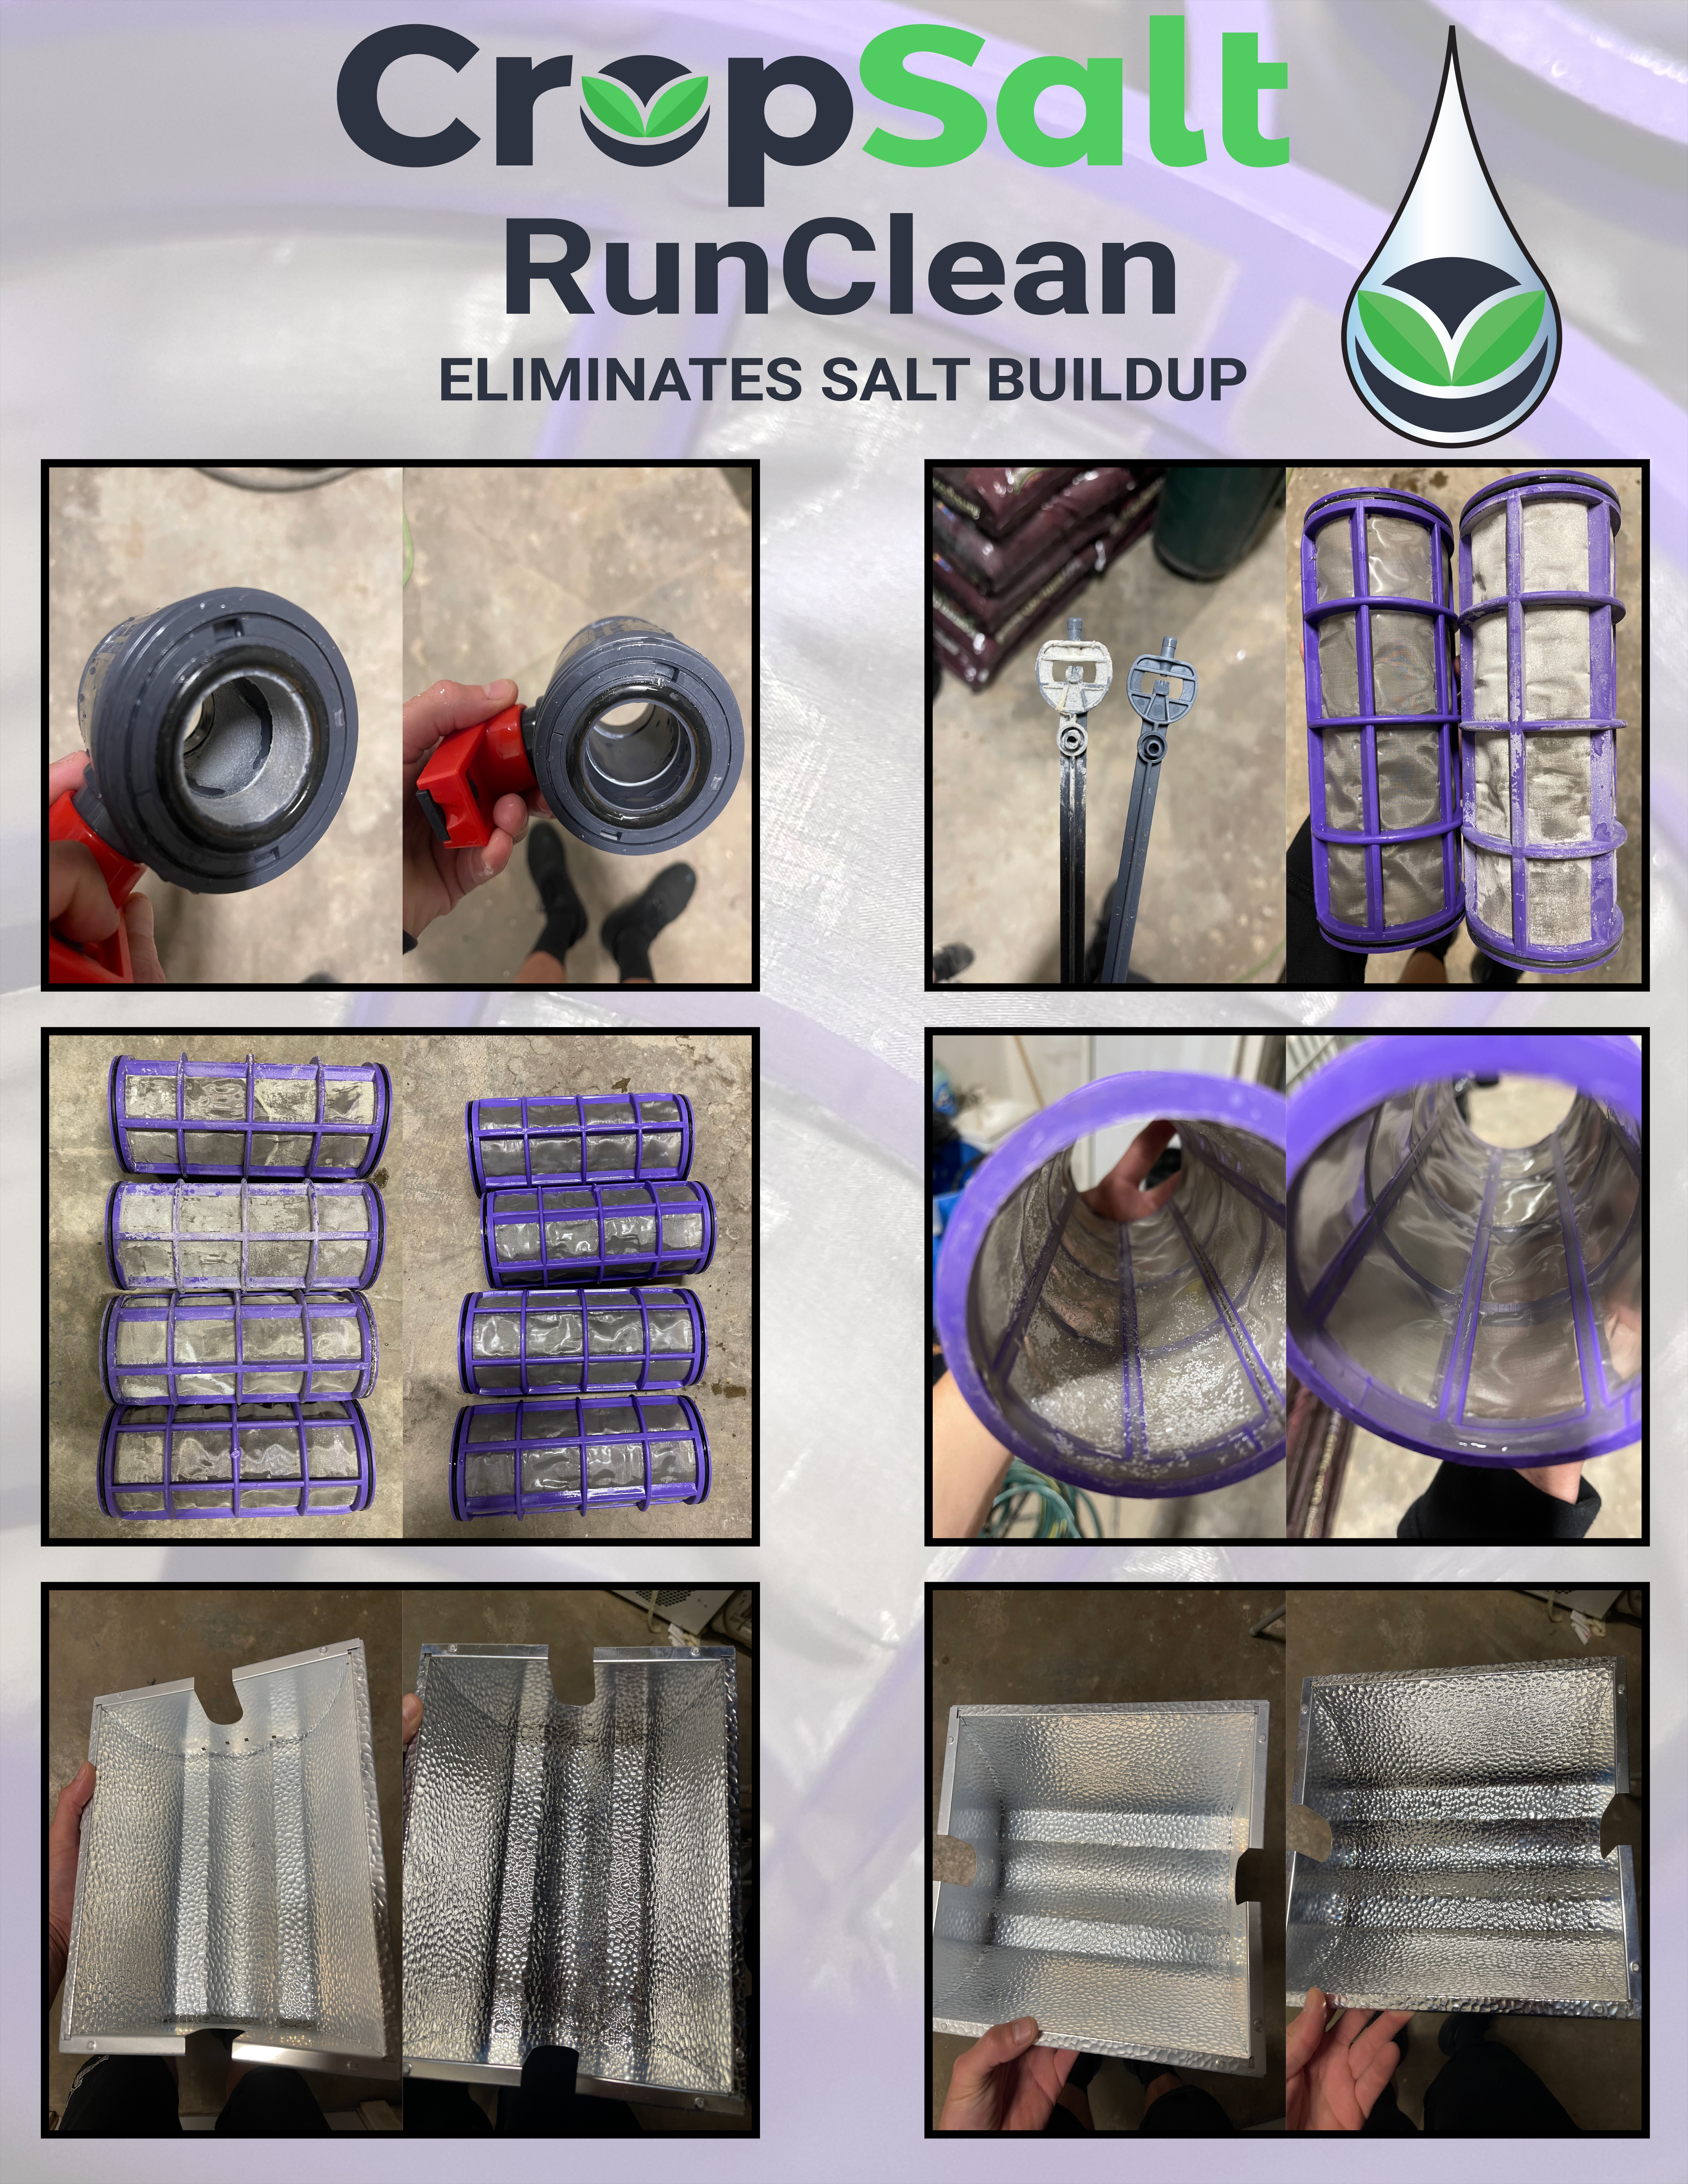 Runclean - No more irrigation clogs and scale 1203